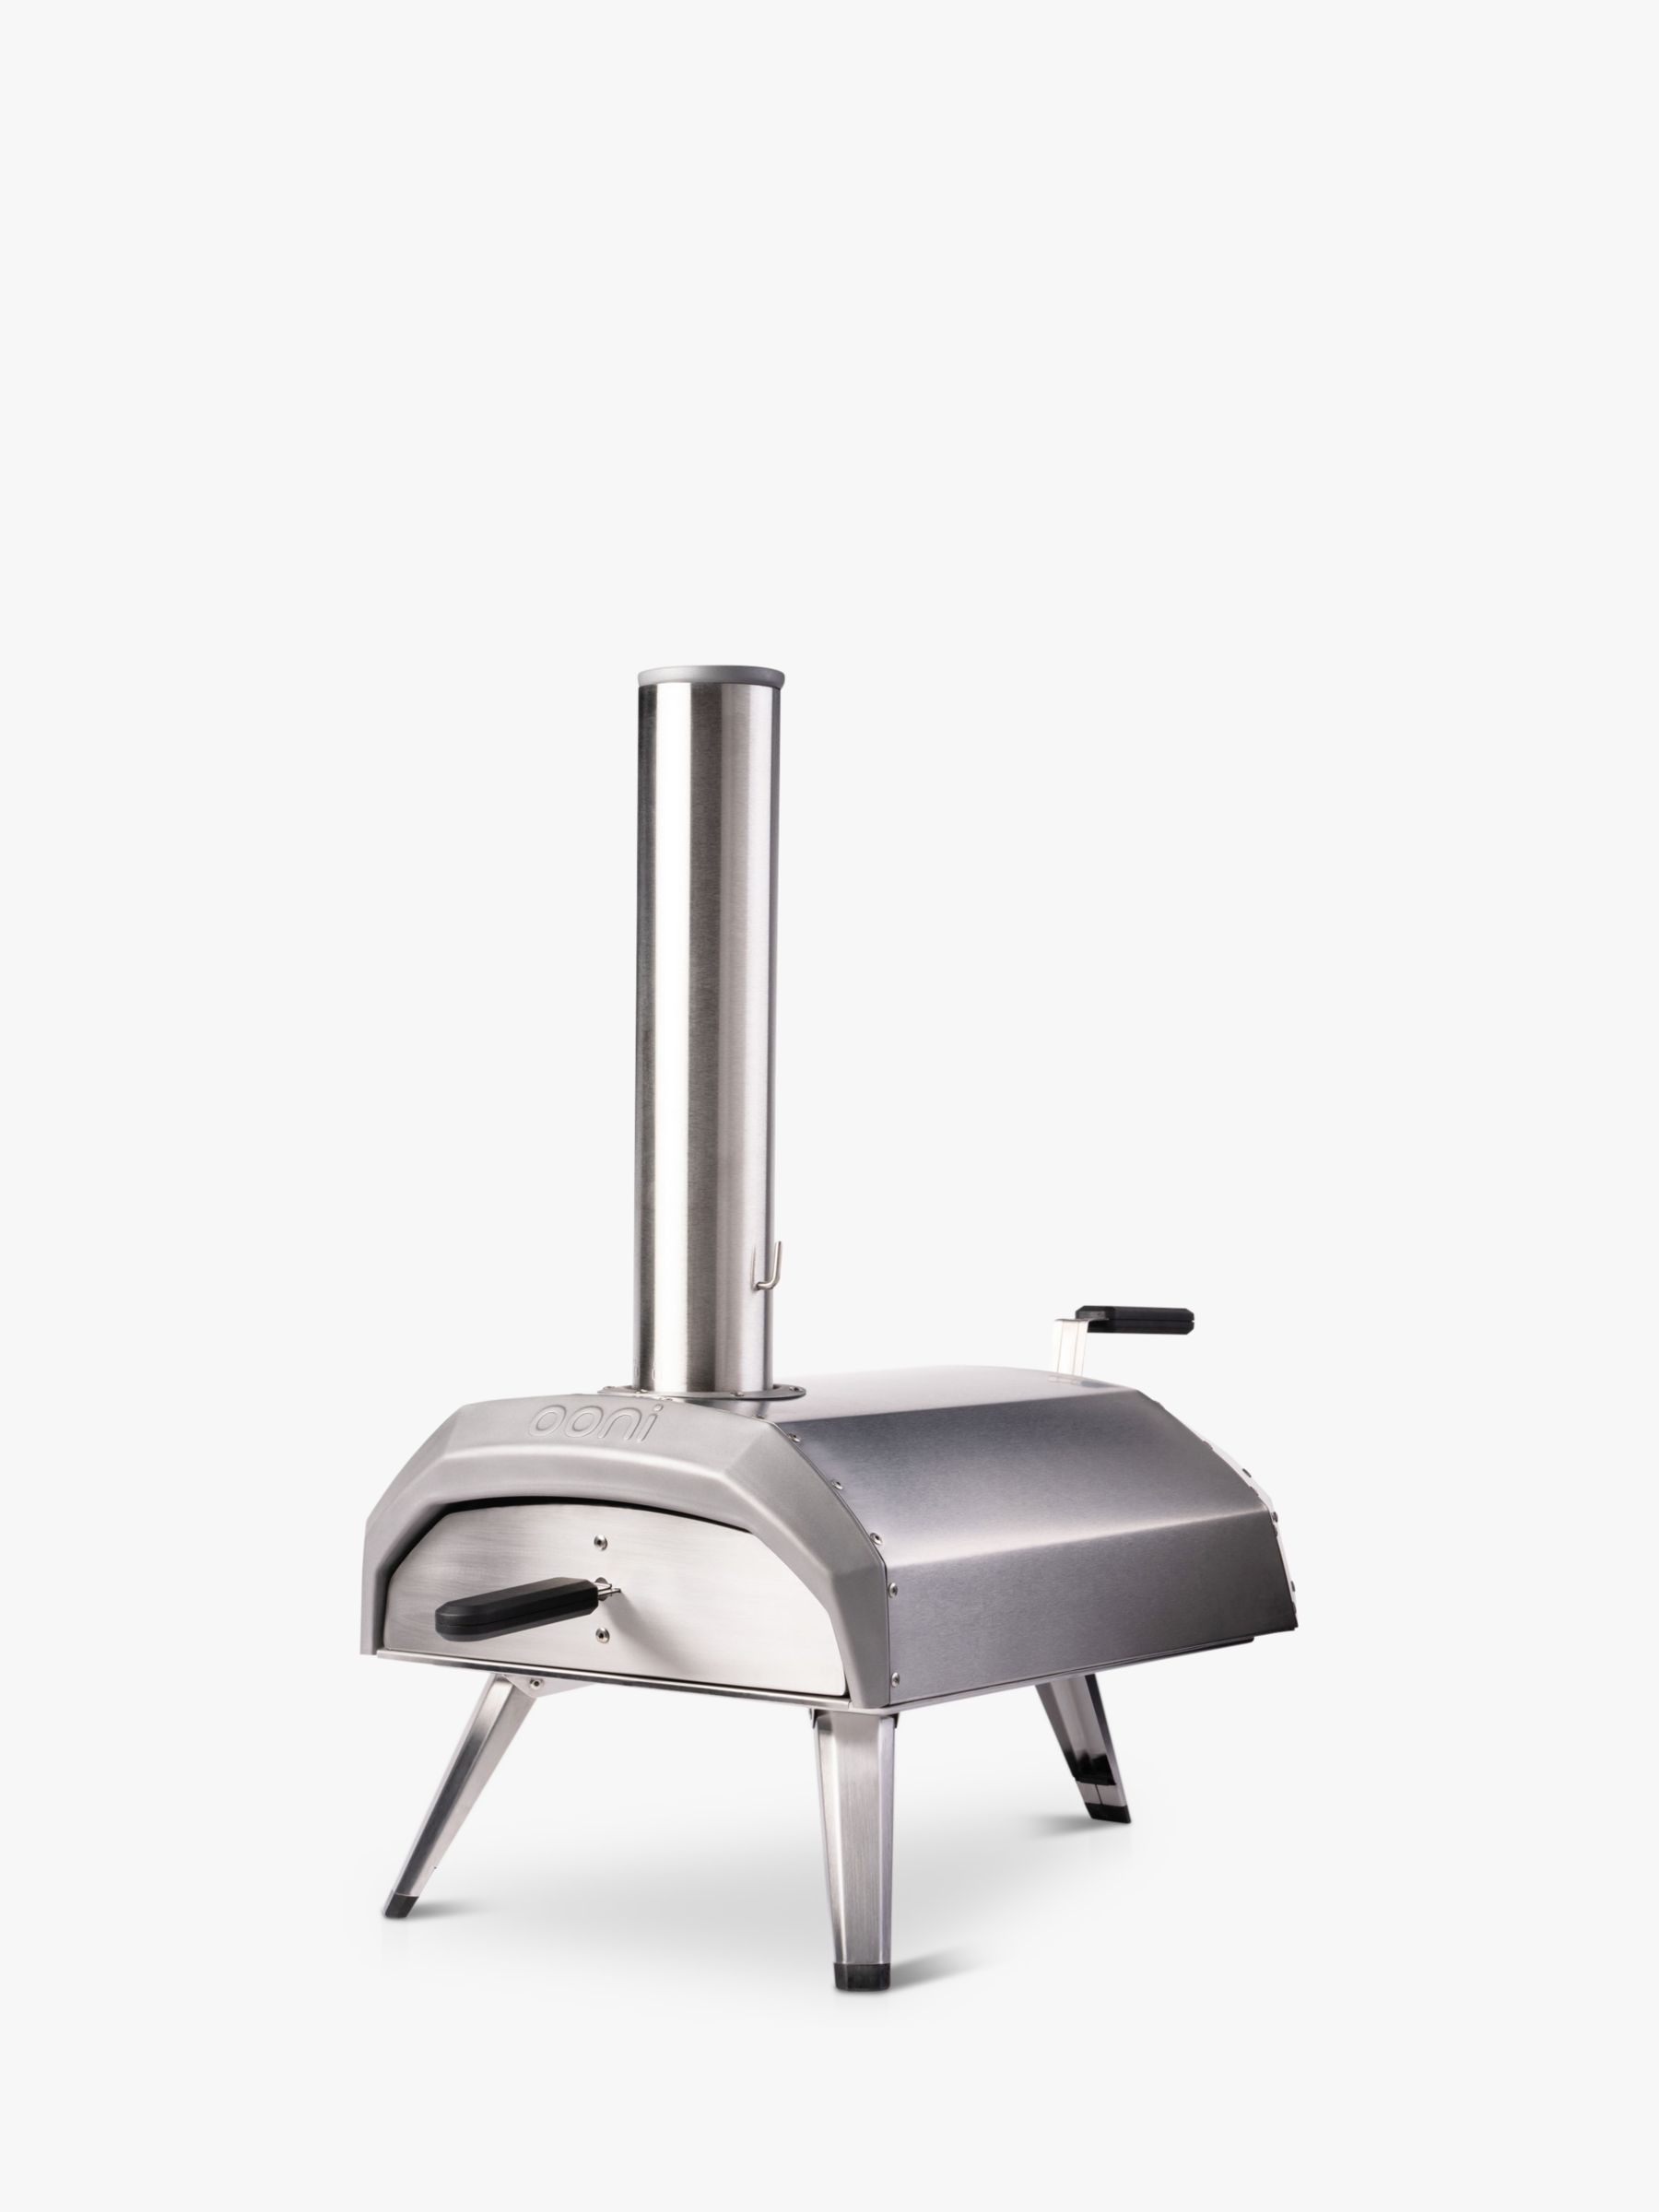 Photo of Ooni karu 12 dual fuel portable outdoor pizza oven